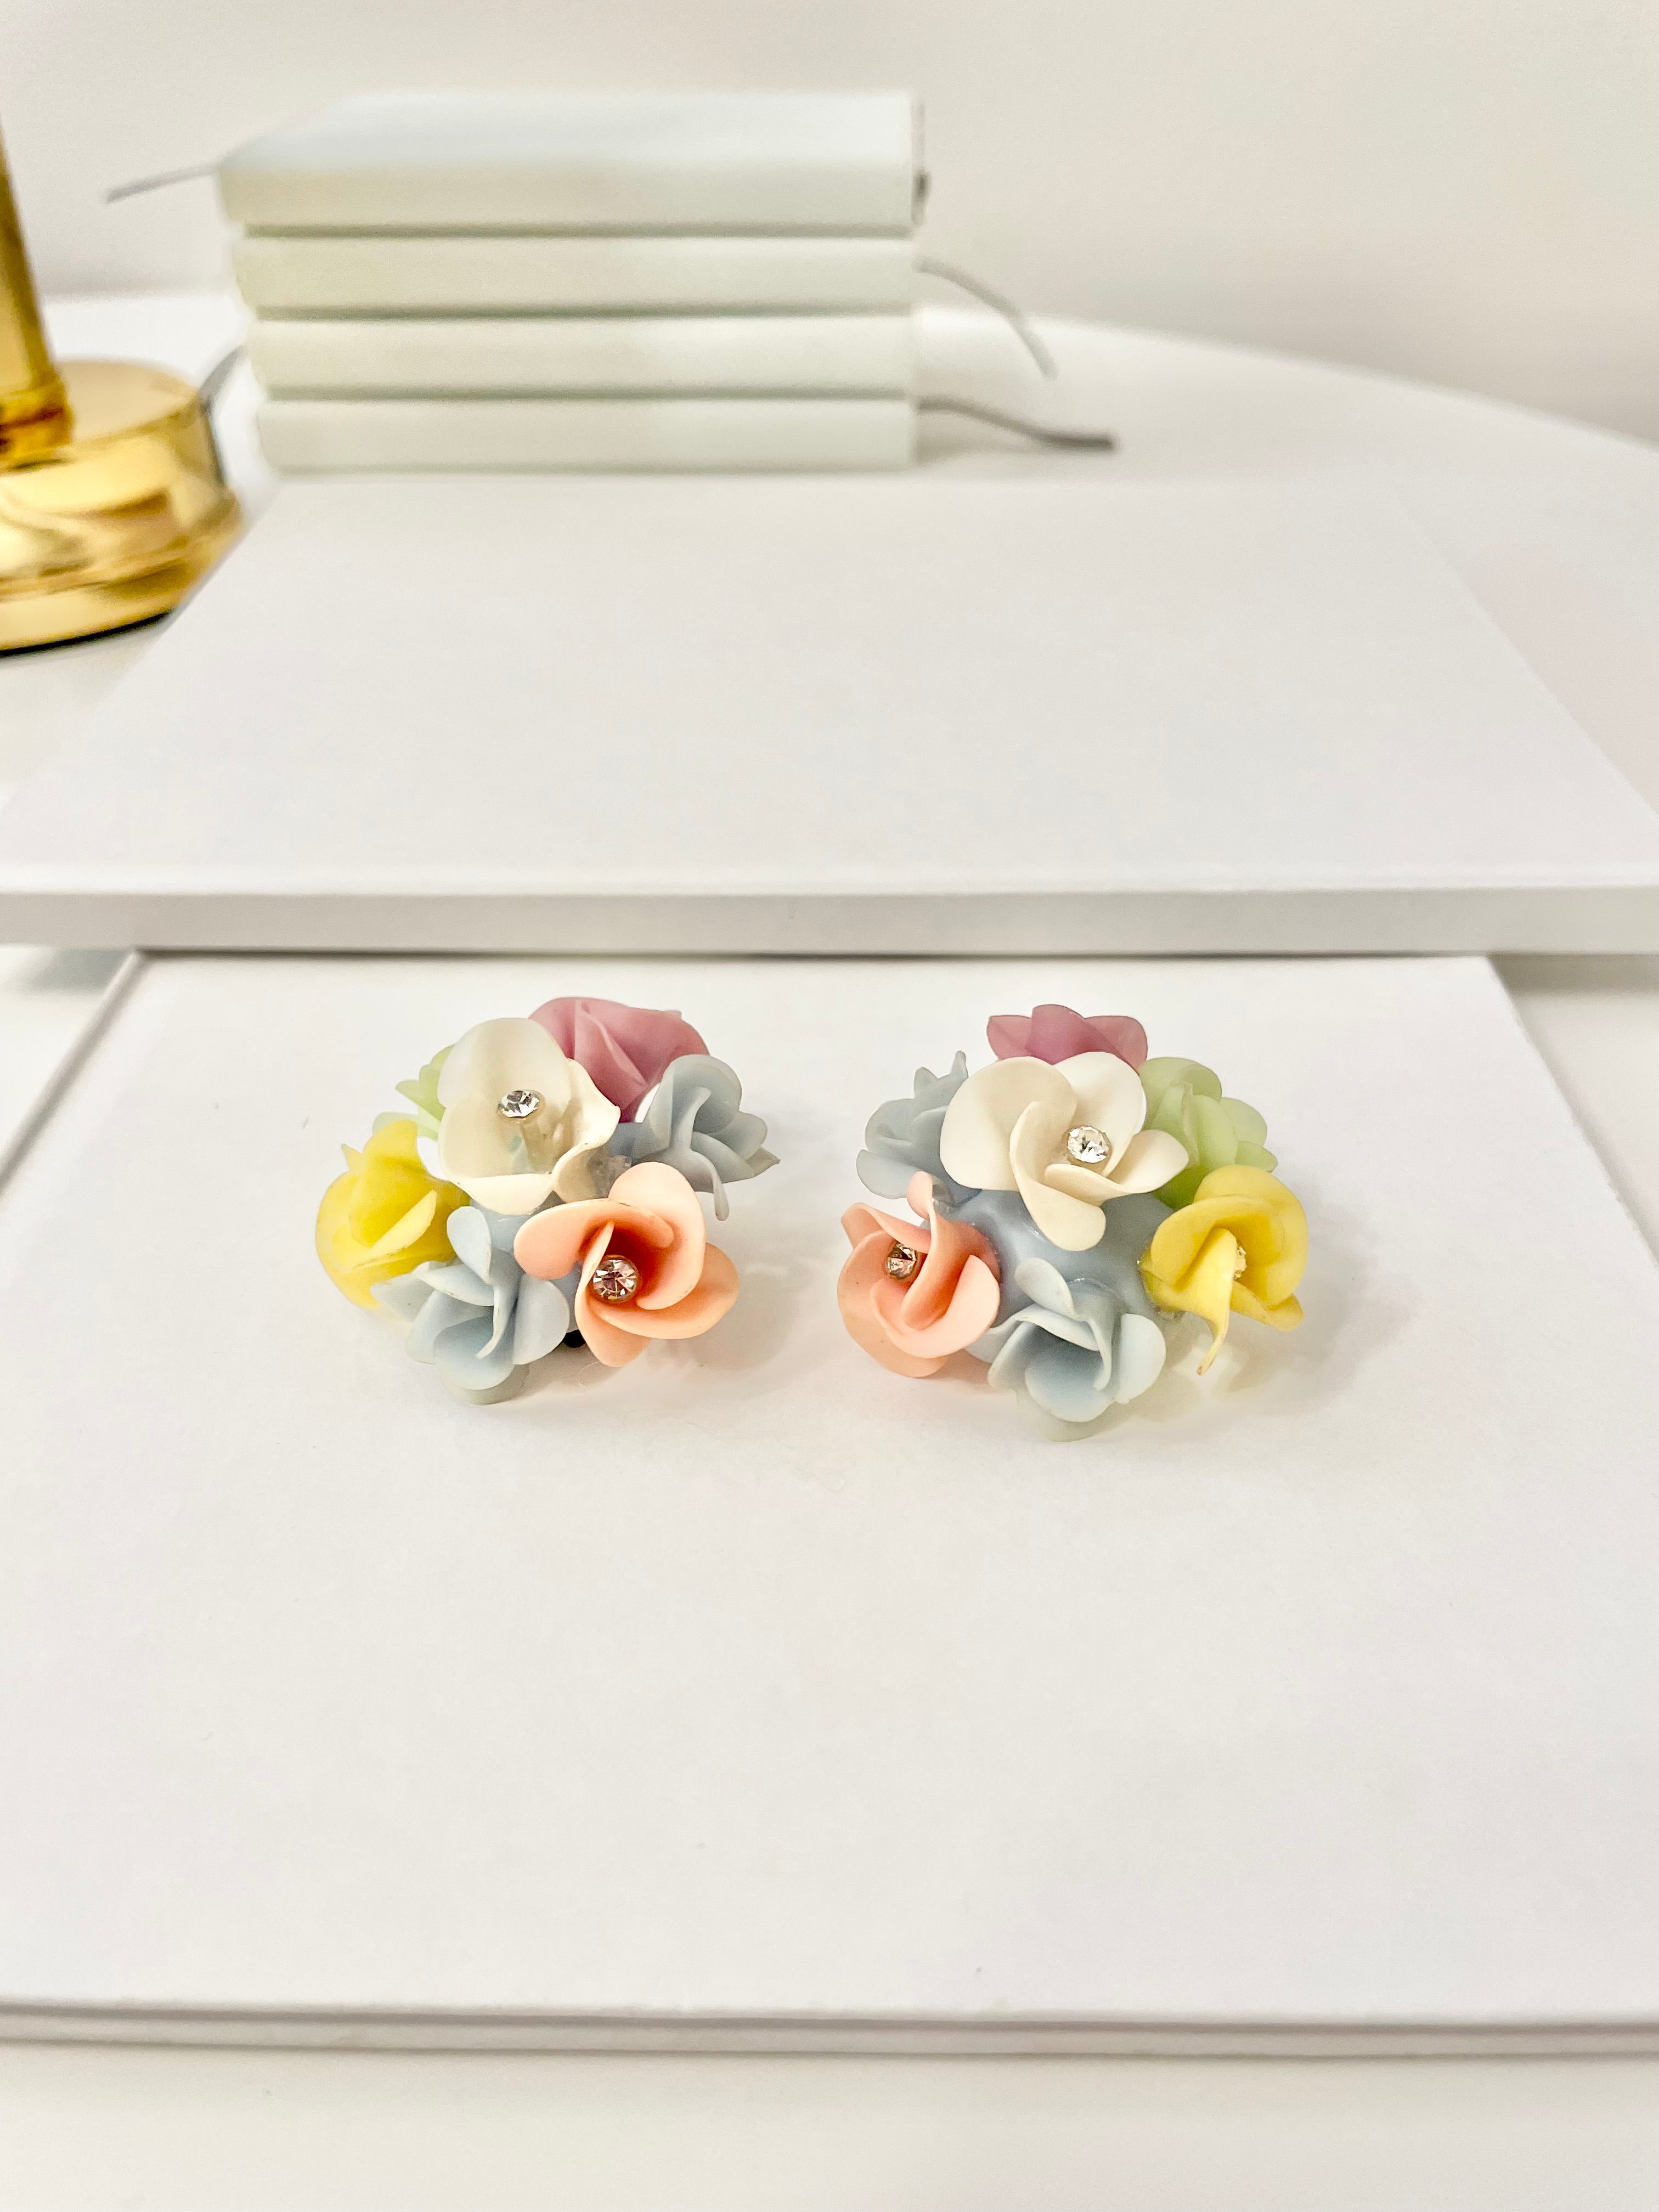 1960's Heiress and her love affair with flower clip on earrings.. the color palette of these are extraordinary!